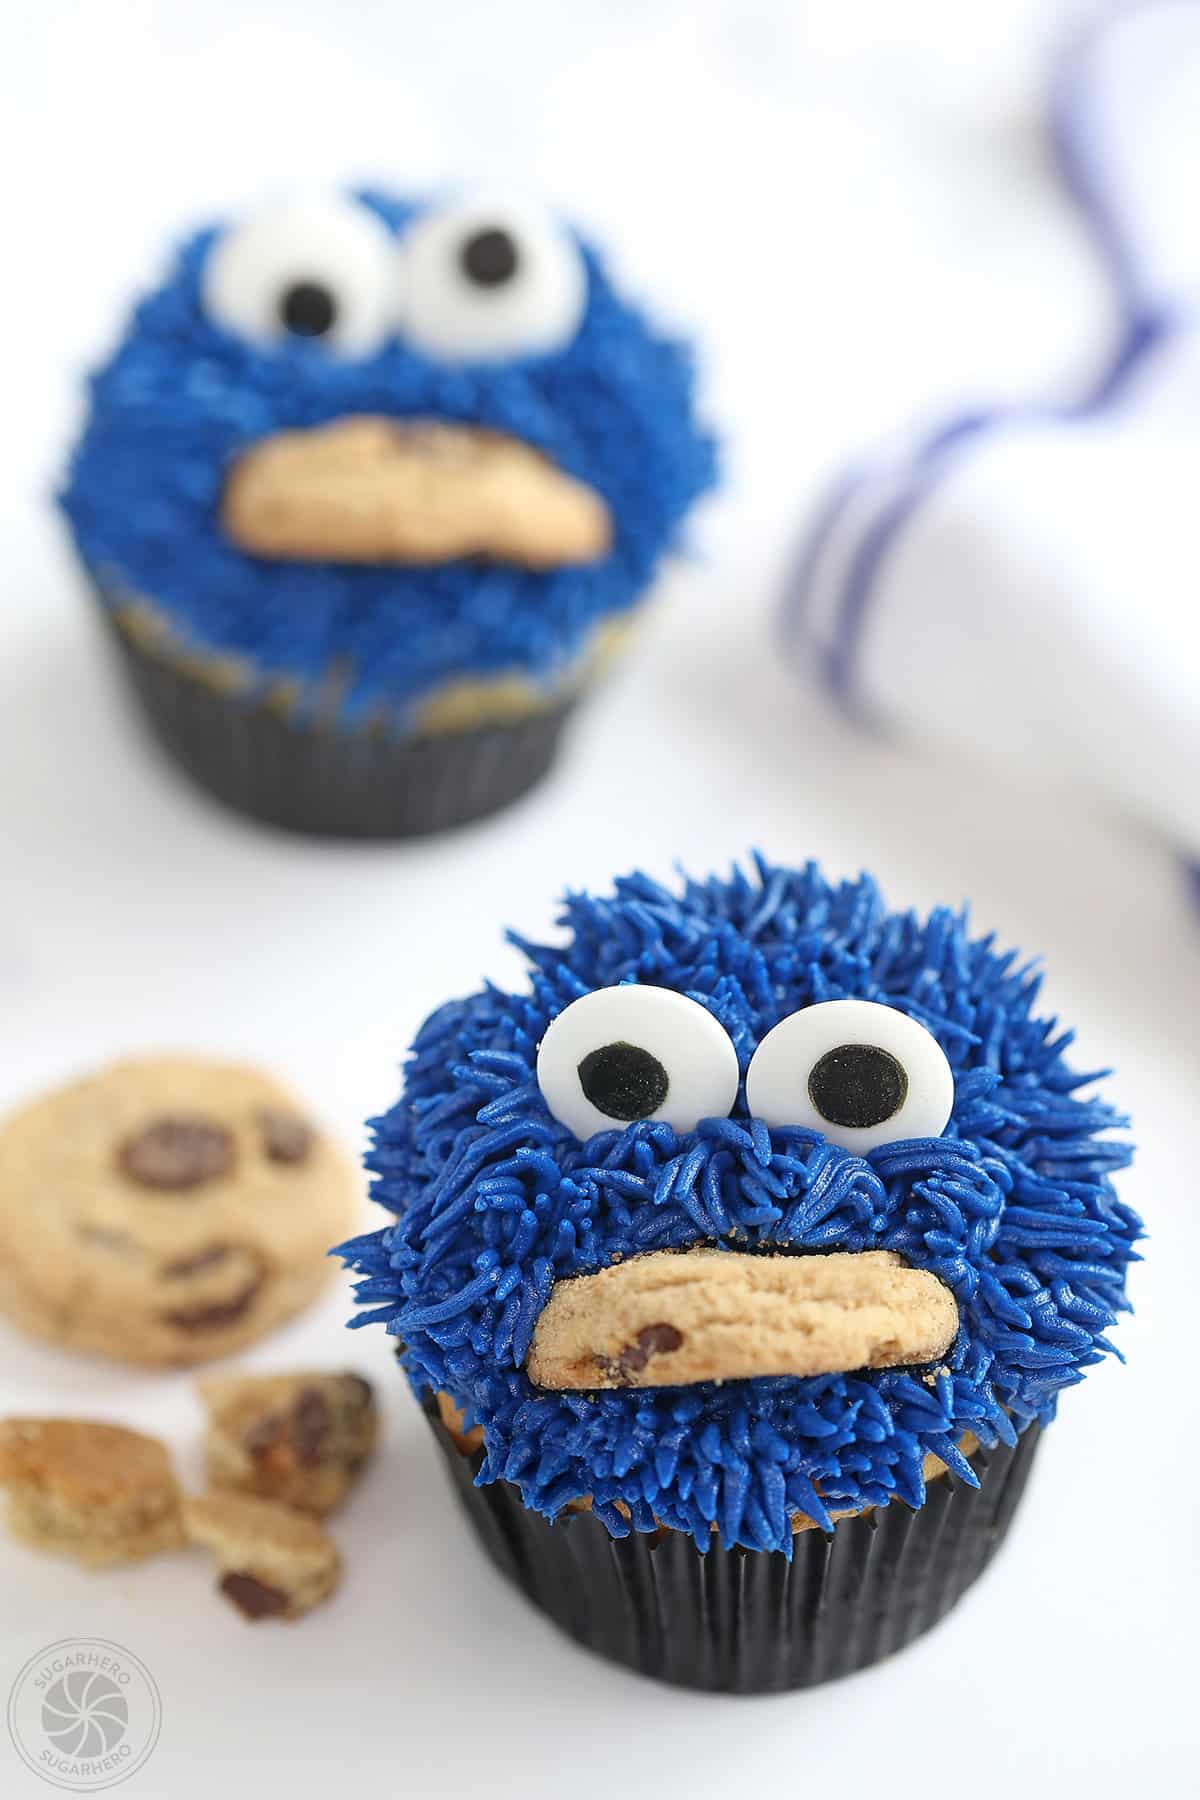 Two Cookie Monster Cupcakes with a white and blue napkin and crumbled cookies on the side.